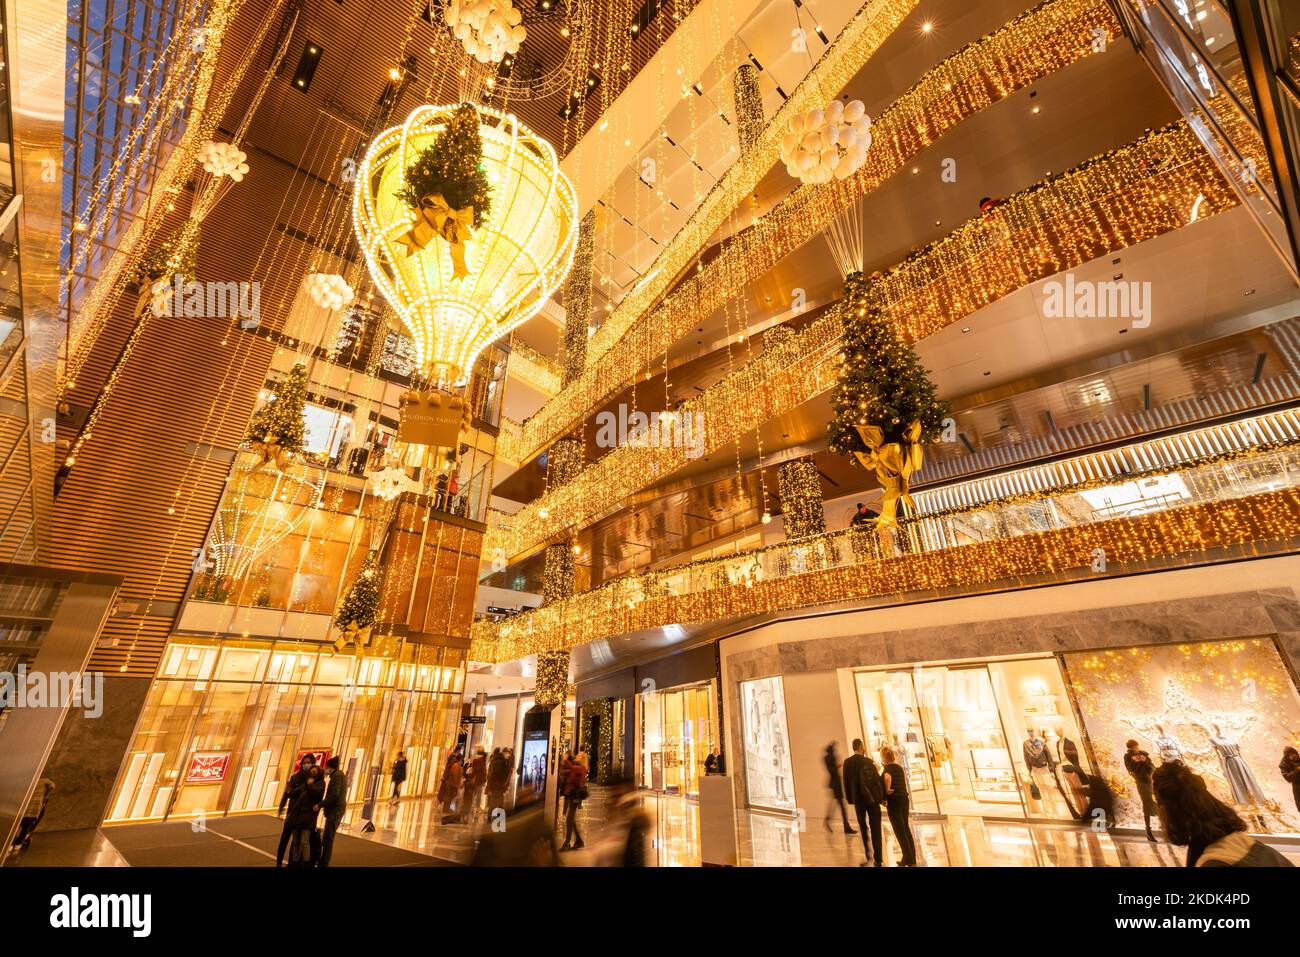 Hudson Yards Shopping Mall with illuminated Christmas decorations in evening. Midtown Manhattan, New York City Stock Photo